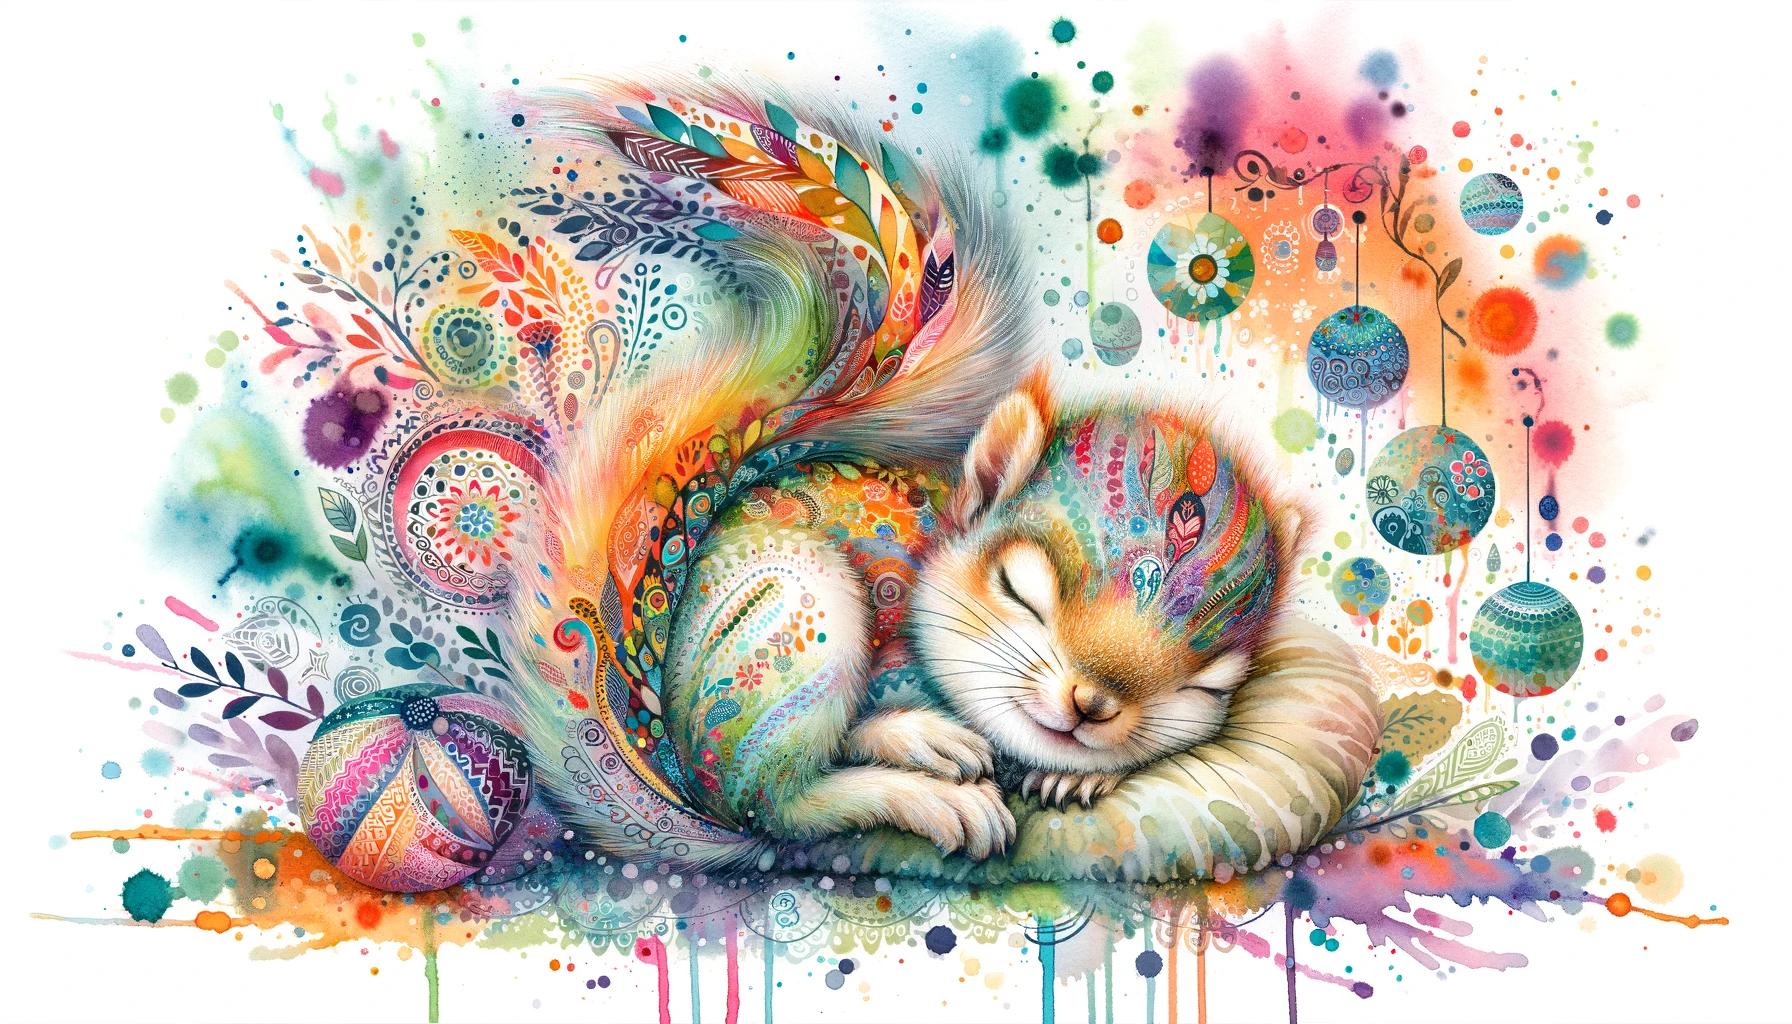 Rainbow Squirrel Sleeping on a Pillow Painting